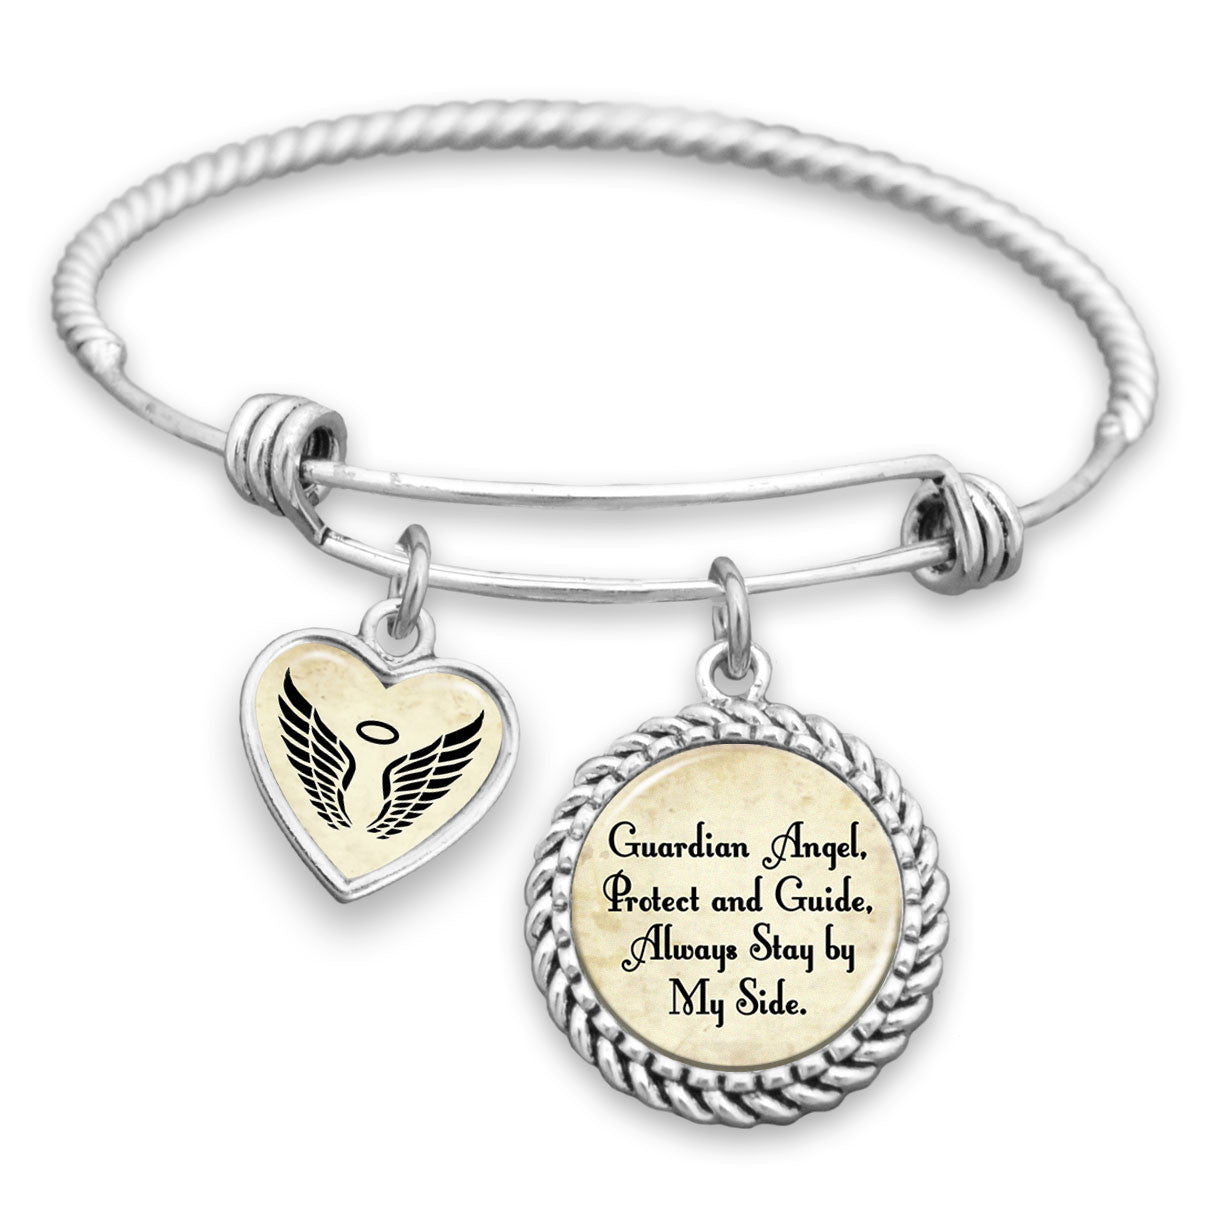 Guardian Angel, Protect And Guide, Always Stay By My Side Charm Bracelet